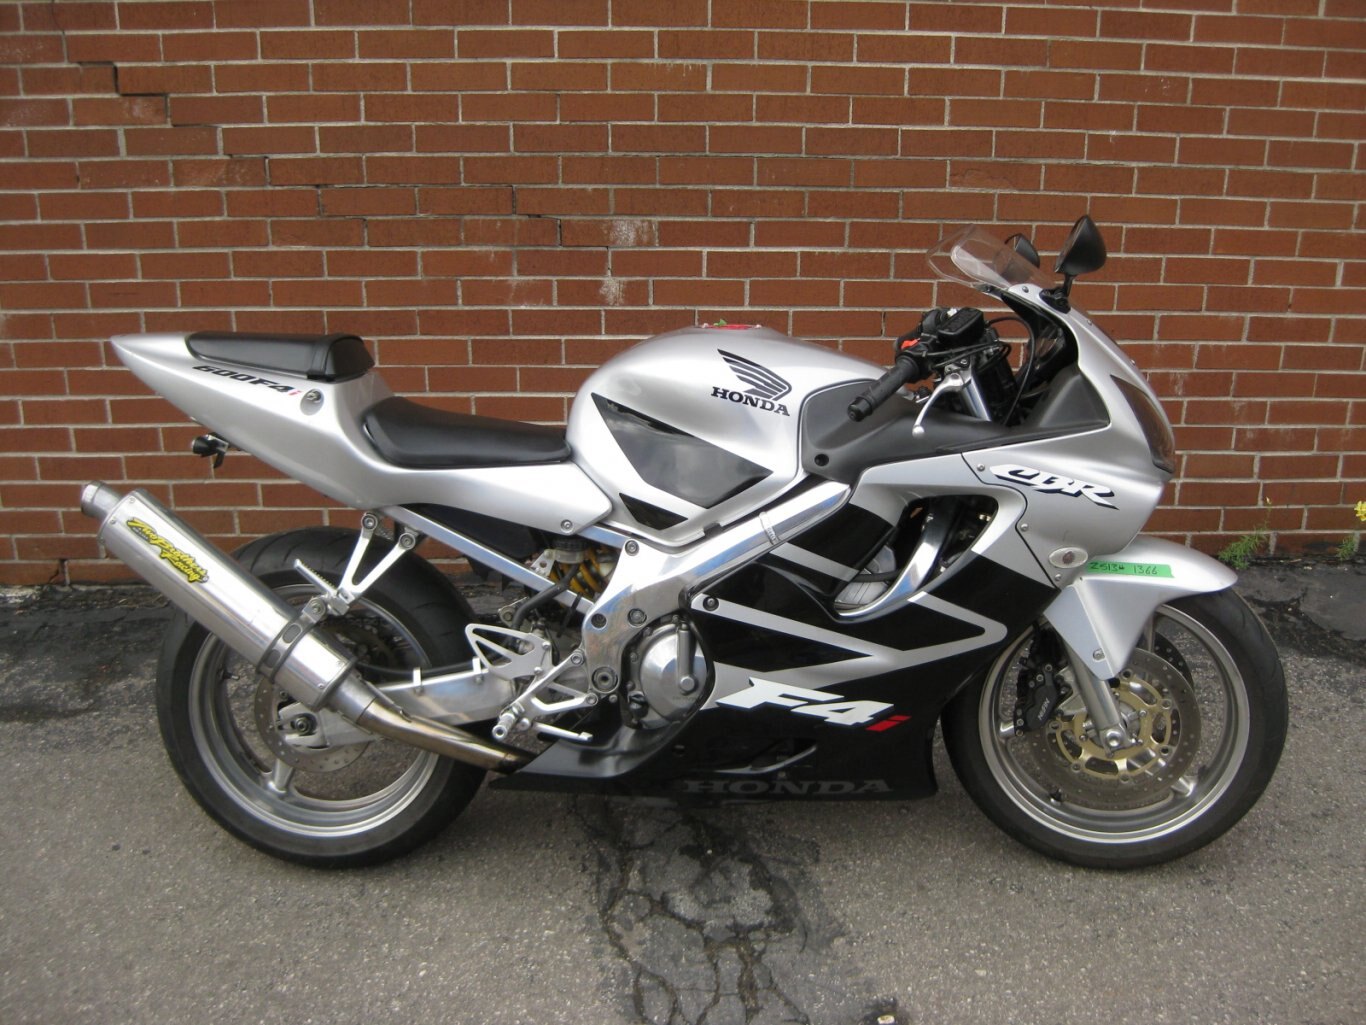 2001 Honda CBR600F4i SOLD CONGRATULATIONS TO RONEIL !! WELCOME TO THE COMMUNITY OF MOTORCYCLING ON THIS SUPERSPORT STYLE HONDA F4i TWO WHEEL FREEDOM MACHINE !!! WHETHER CUTIN THROUGH CITY STREETS OR CARVIN THROUGH THE CANYONS YOU WILL HAVE SMILES FOR MANY MILES WITH THANKS FROM GARY & TEAM CYCLE WORLD!!!!